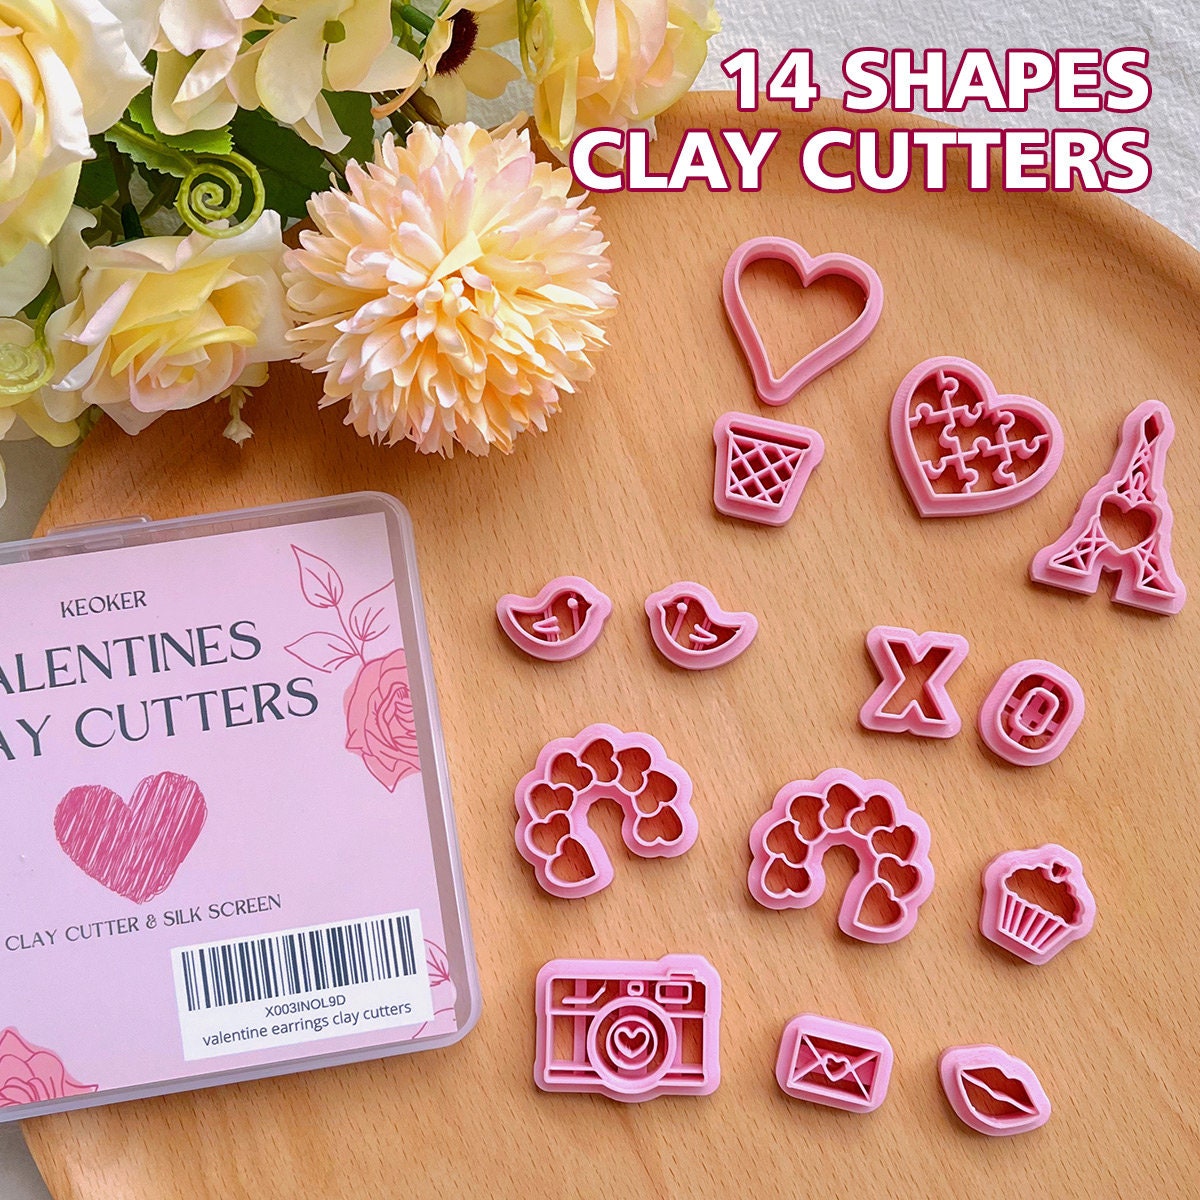 VALENTINES SET 14 Polymer Clay Cutters Clay Imprint Embossed Stamp